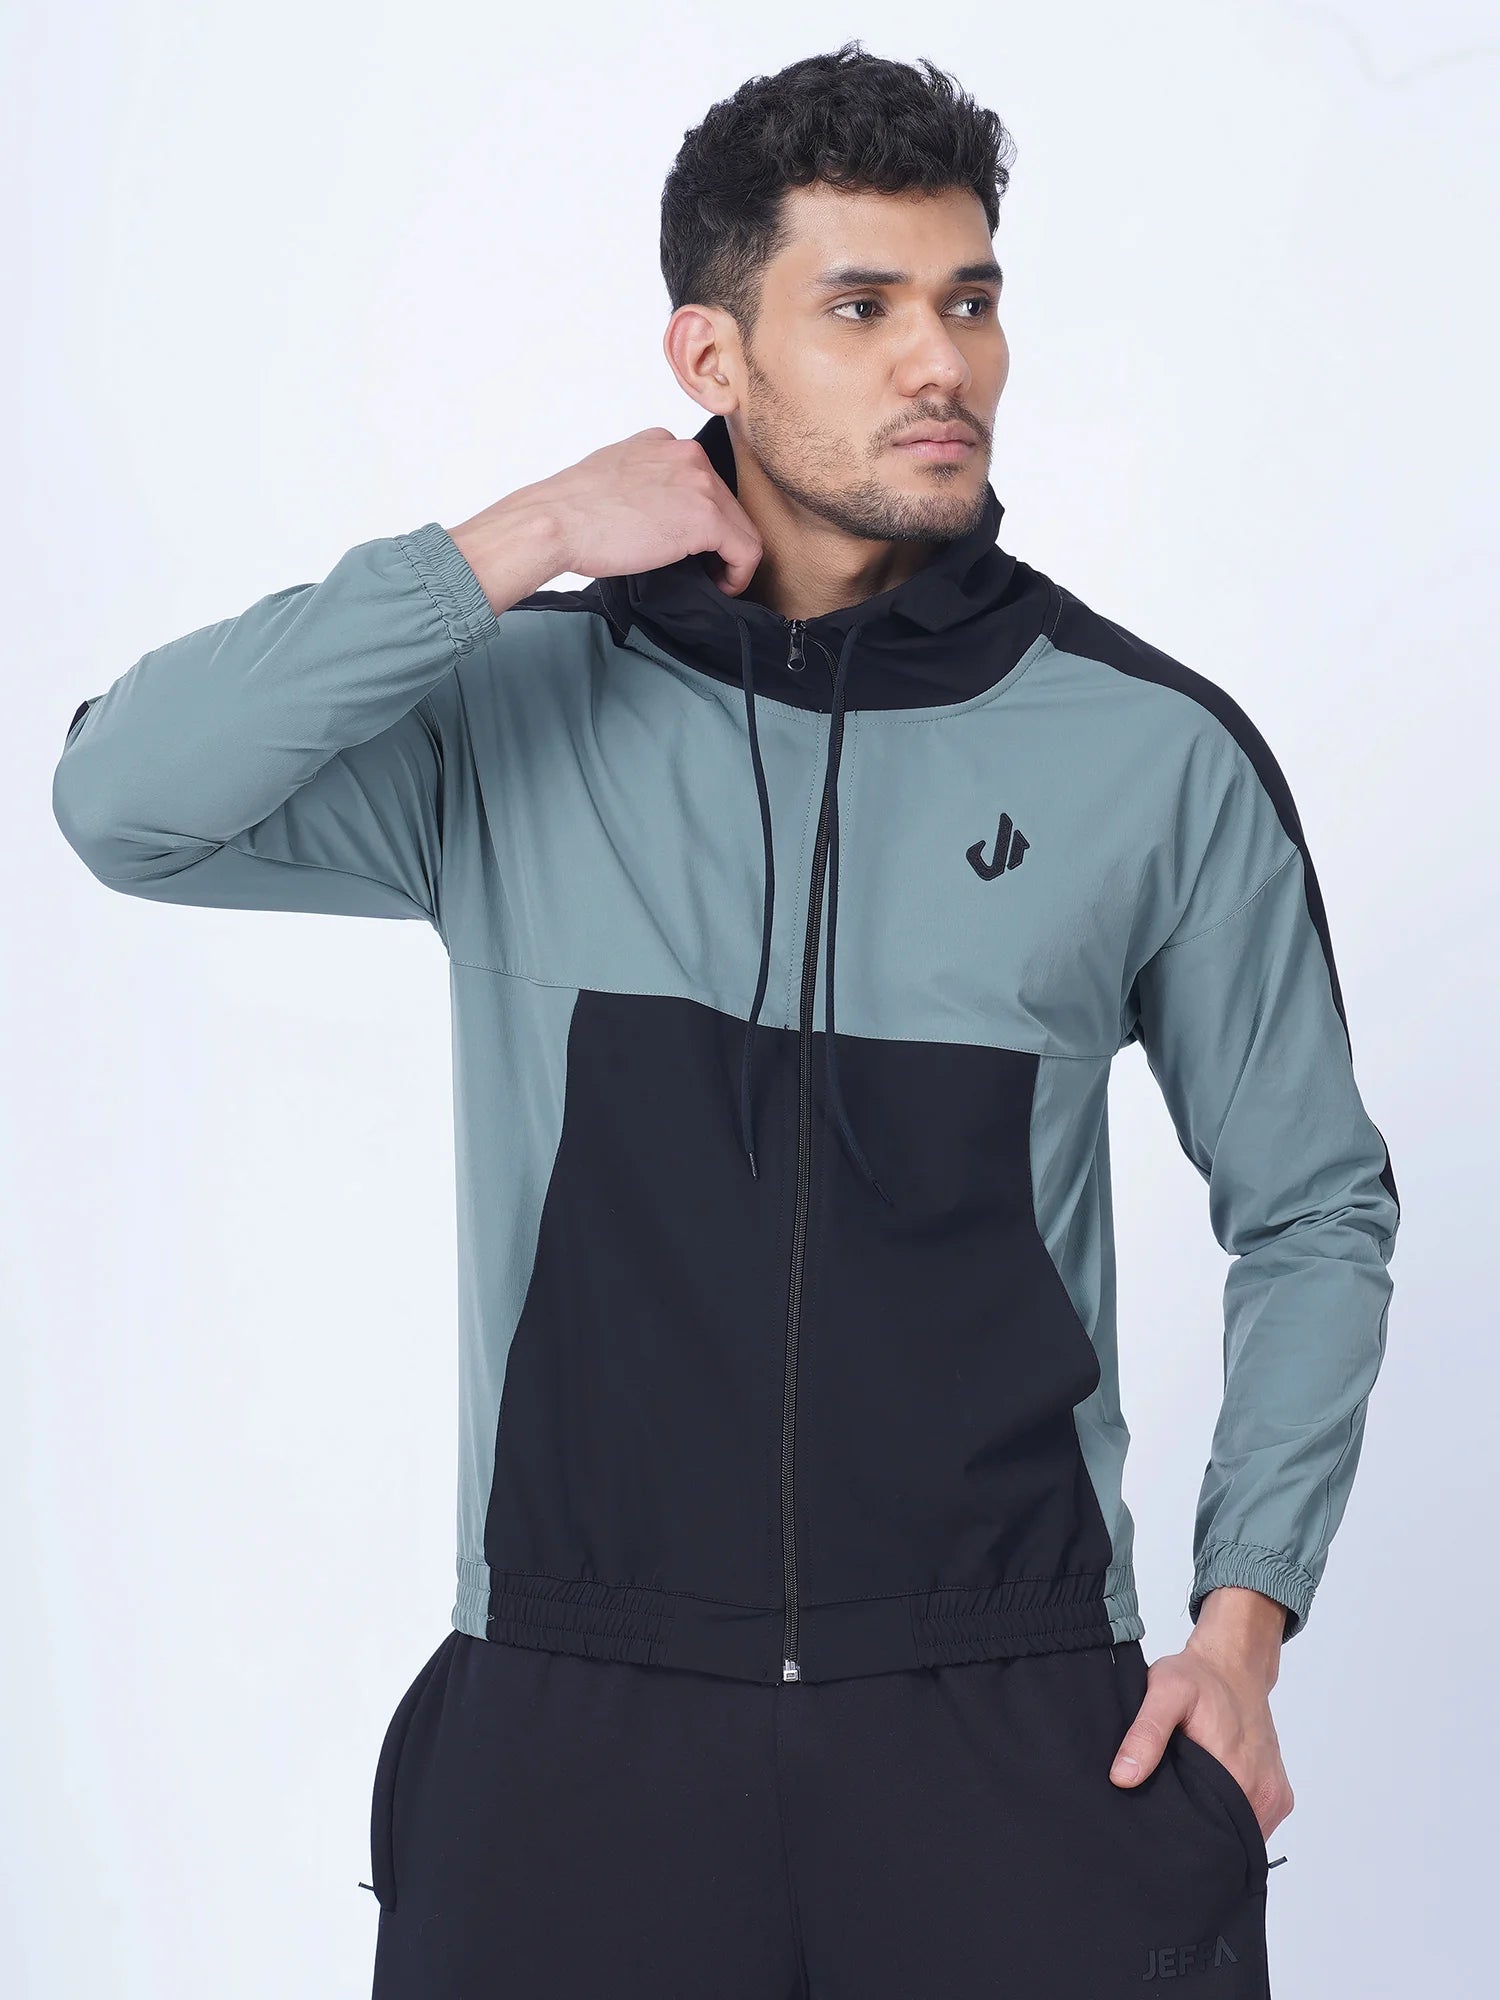 Workout Hoodies & Jackets For Men: Best for Gym & Sports Purpose – JEFFA